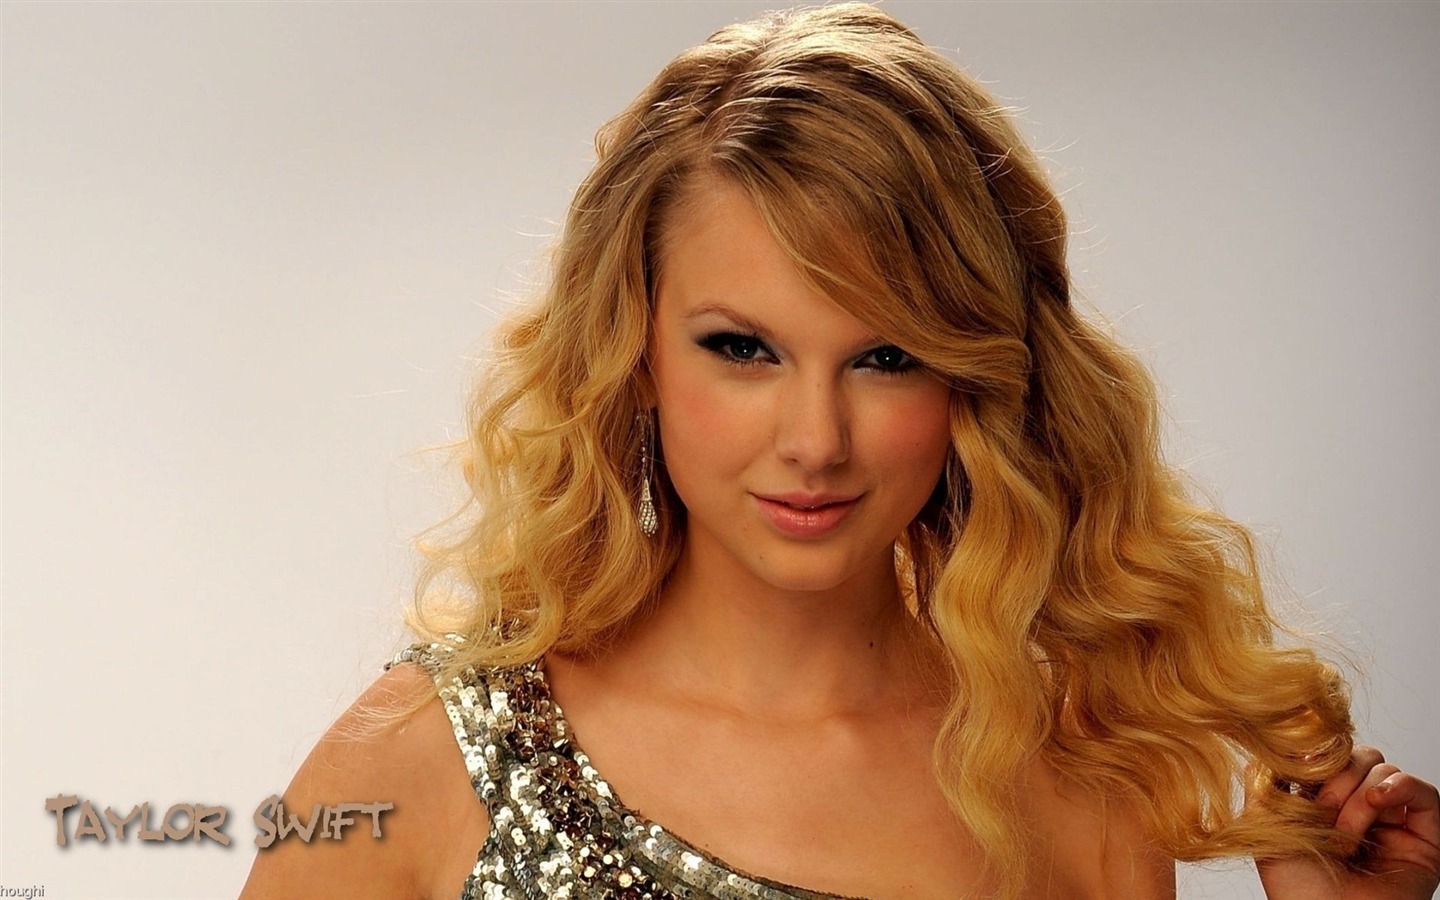 Taylor Swift #059 - 1440x900 Wallpapers Pictures Photos Images